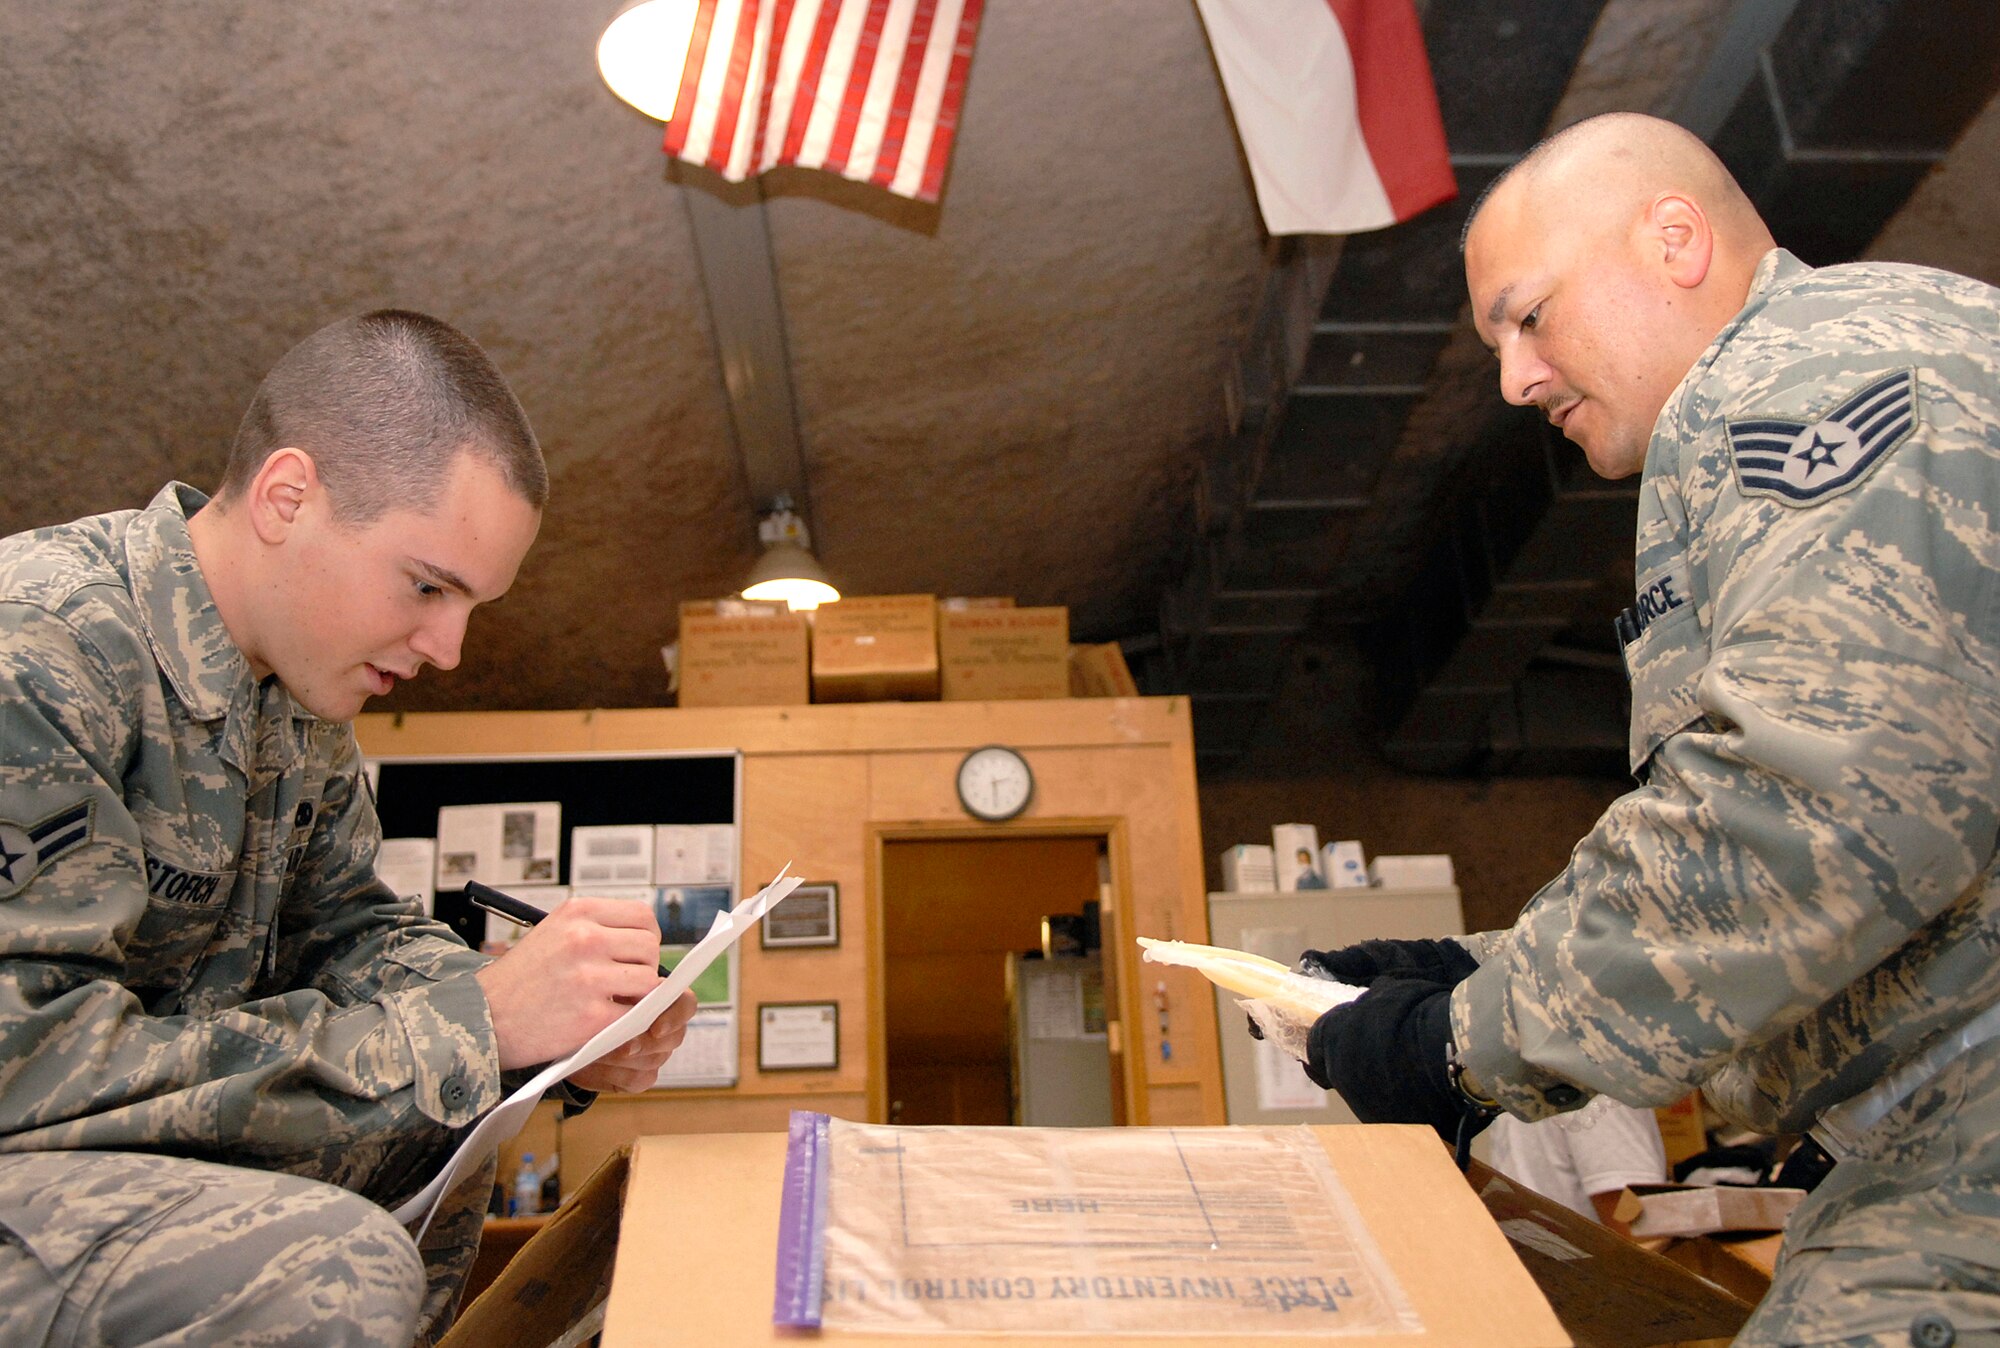 Airman 1st Class Benjamin Cristofich (left) and Staff Sgt. James Palapas, both volunteers from the 71st Expeditionary Air Control Squadron at this air base in Southwest Asia, assist the 379th Expeditionary Medical Group Blood Transshipment Center staff in inventorying frozen plasma May 9 to ensure it is ready to be distributed throughout the U.S. Central Command area of operation. (U.S. Air Force photo/Senior Airman Andrew Satran)